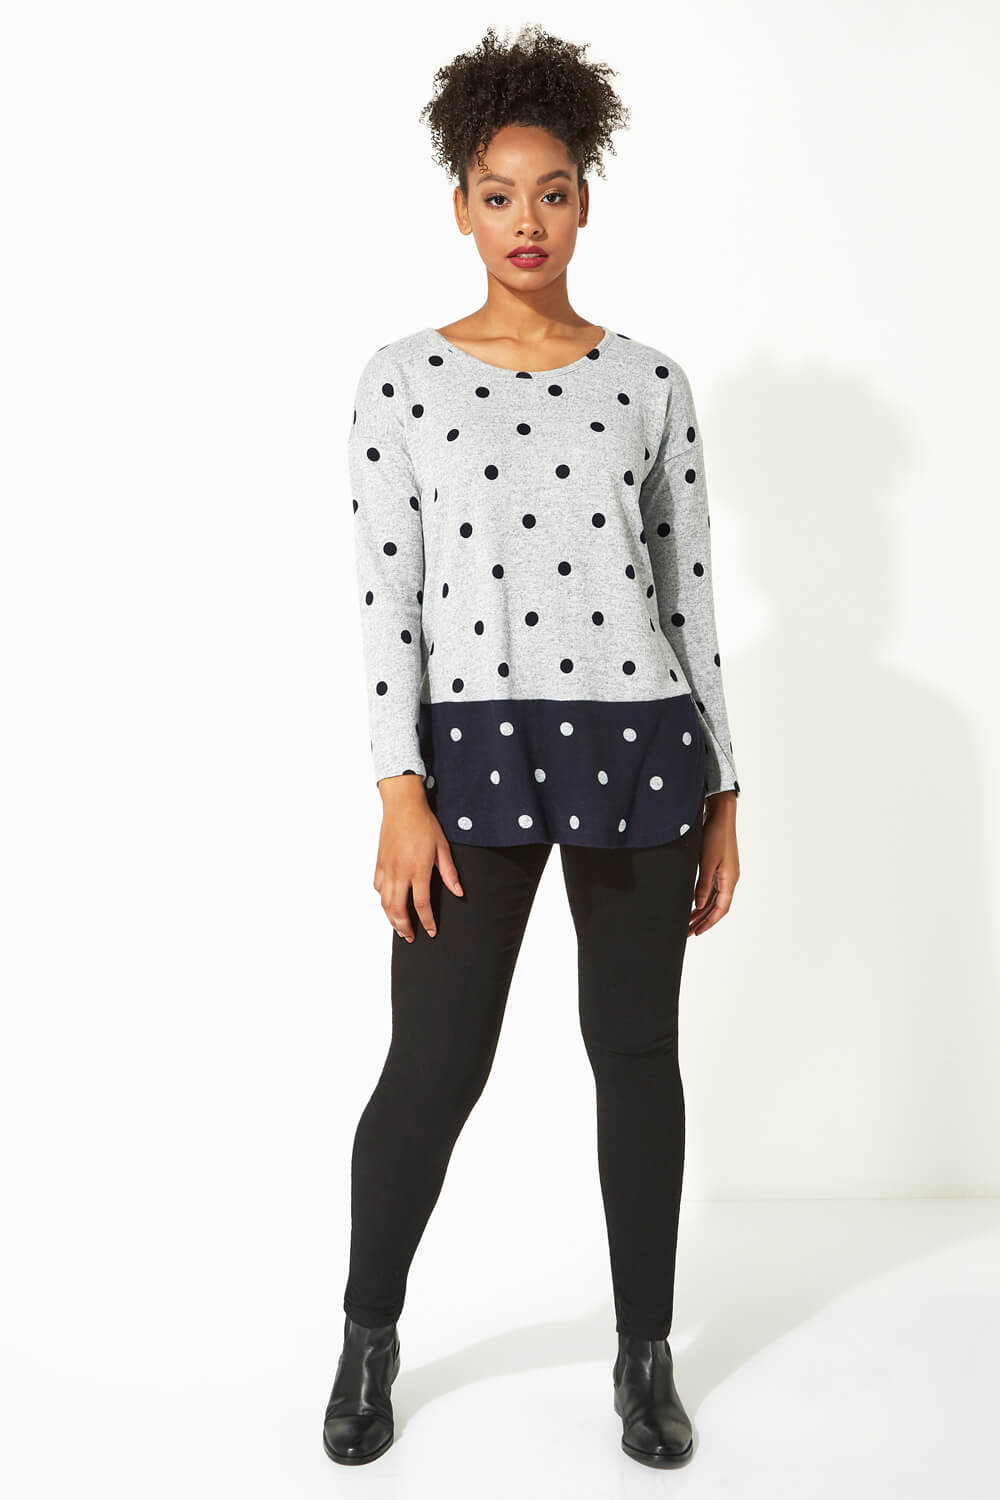 Grey Contrast Polka Dot Round Neck Long Sleeve Top, Image 2 of 4